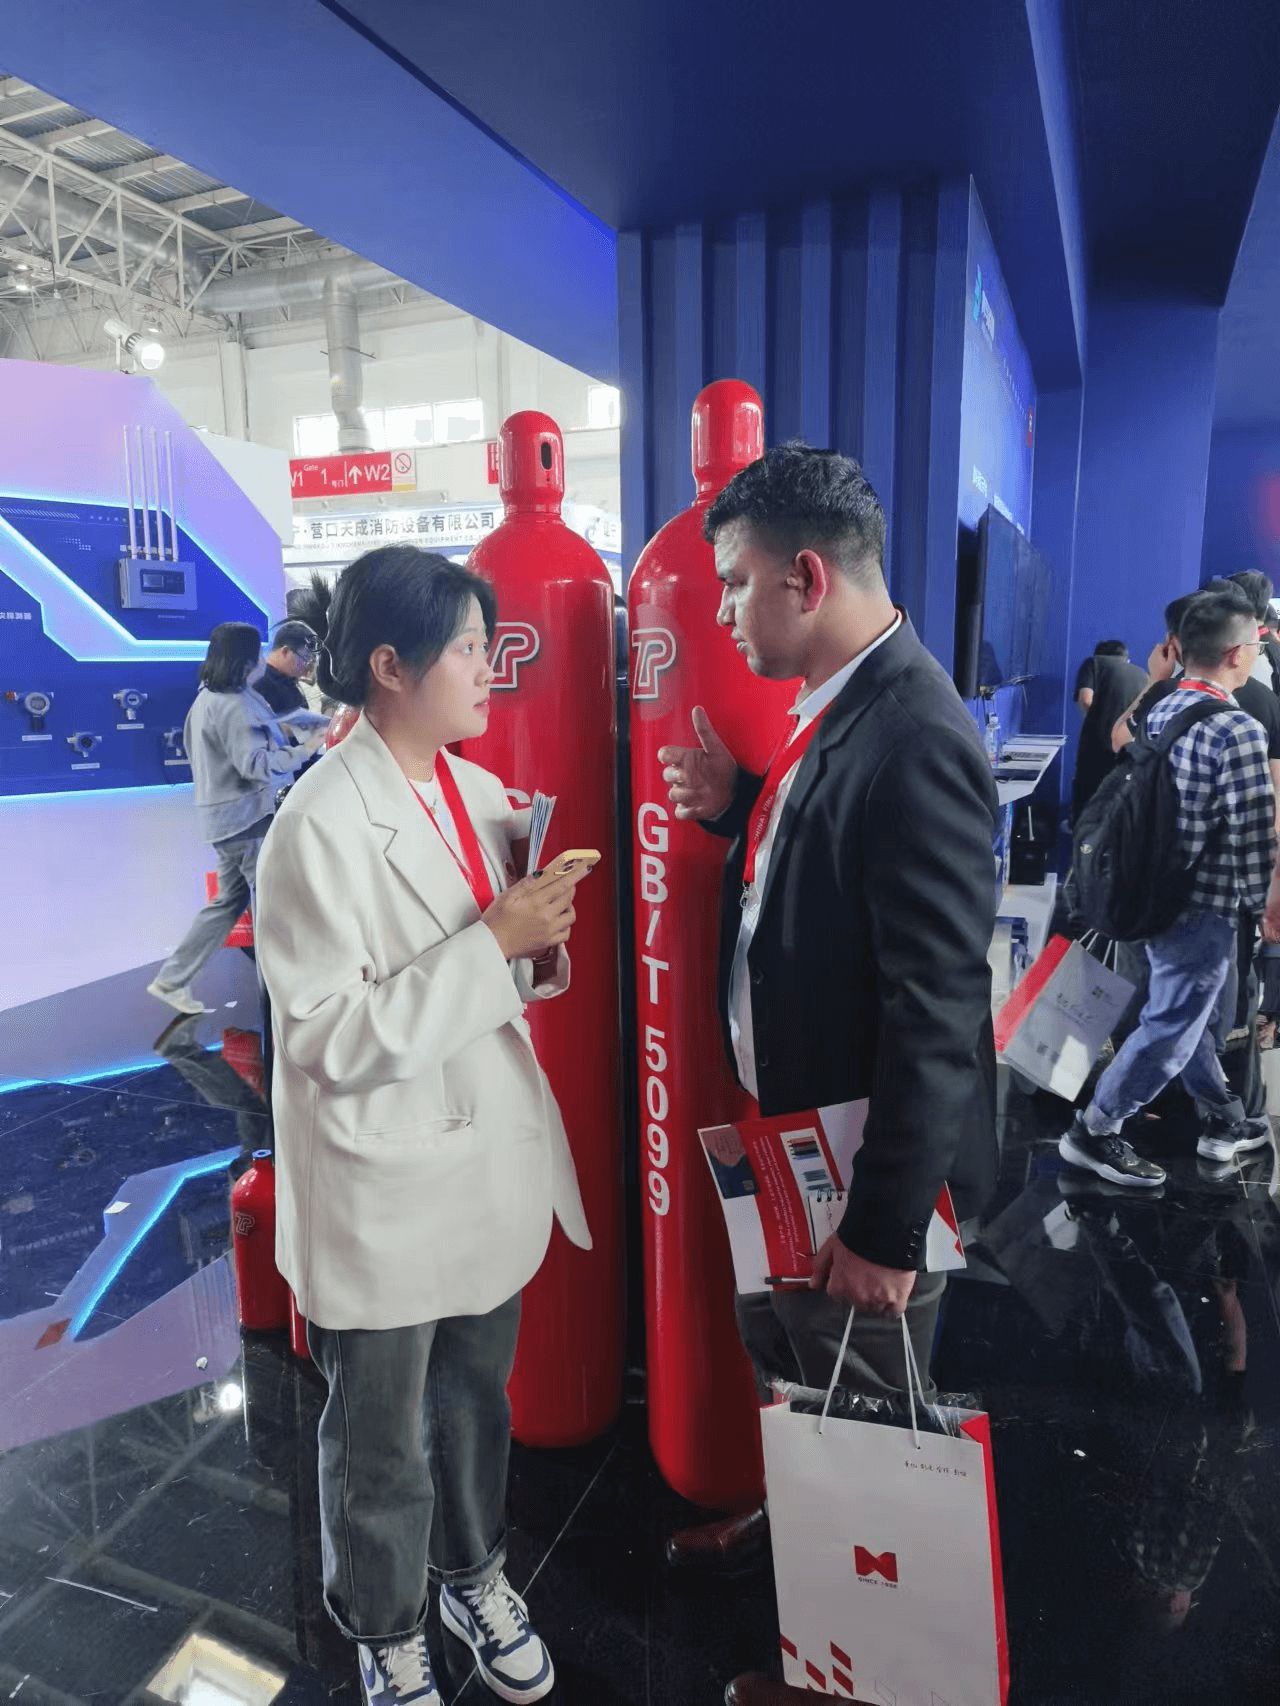 Our company participated in the 20th China International Fire Protection Exhibition